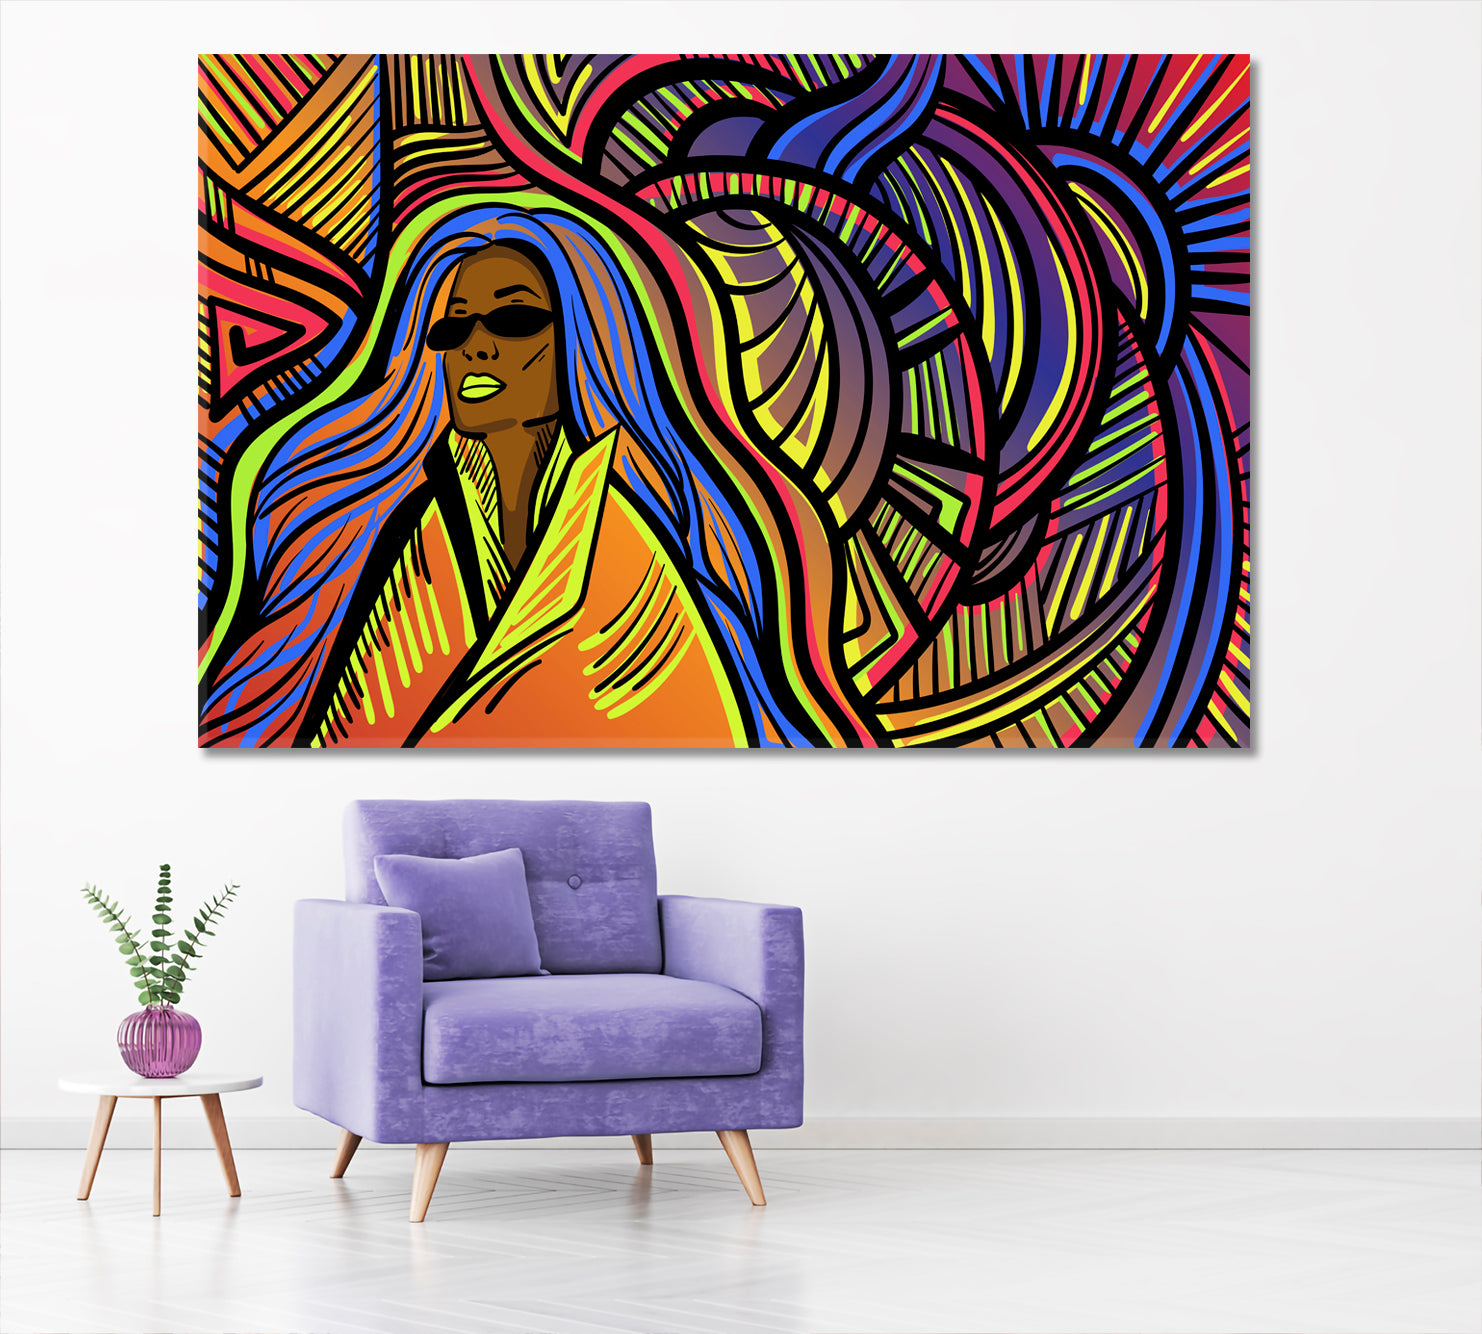 DOODLES Colorful Psychedelic Lines With Abstract Woman Surreal Fantasy Large Art Print Décor Artesty 1 panel 24" x 16" 